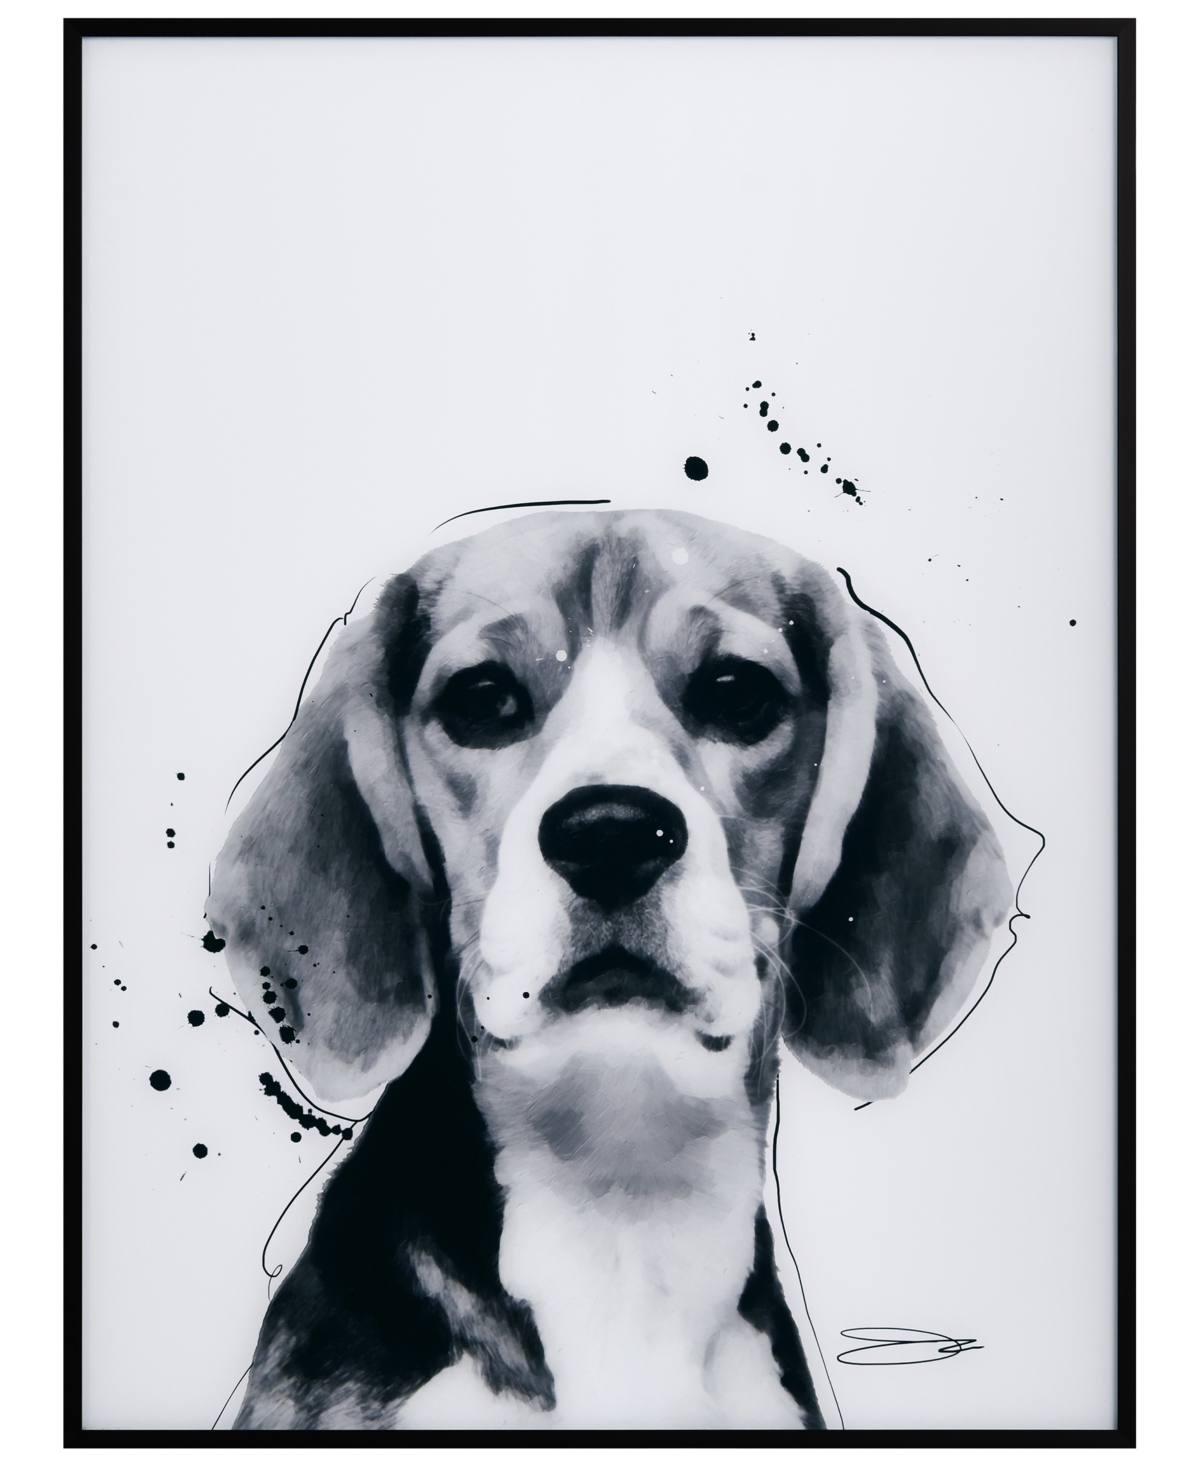 Empire Art Direct "beagle" Pet Paintings On Printed Glass Encased With A Black Anodized Frame, 24" X 18" X 1" In Black And White